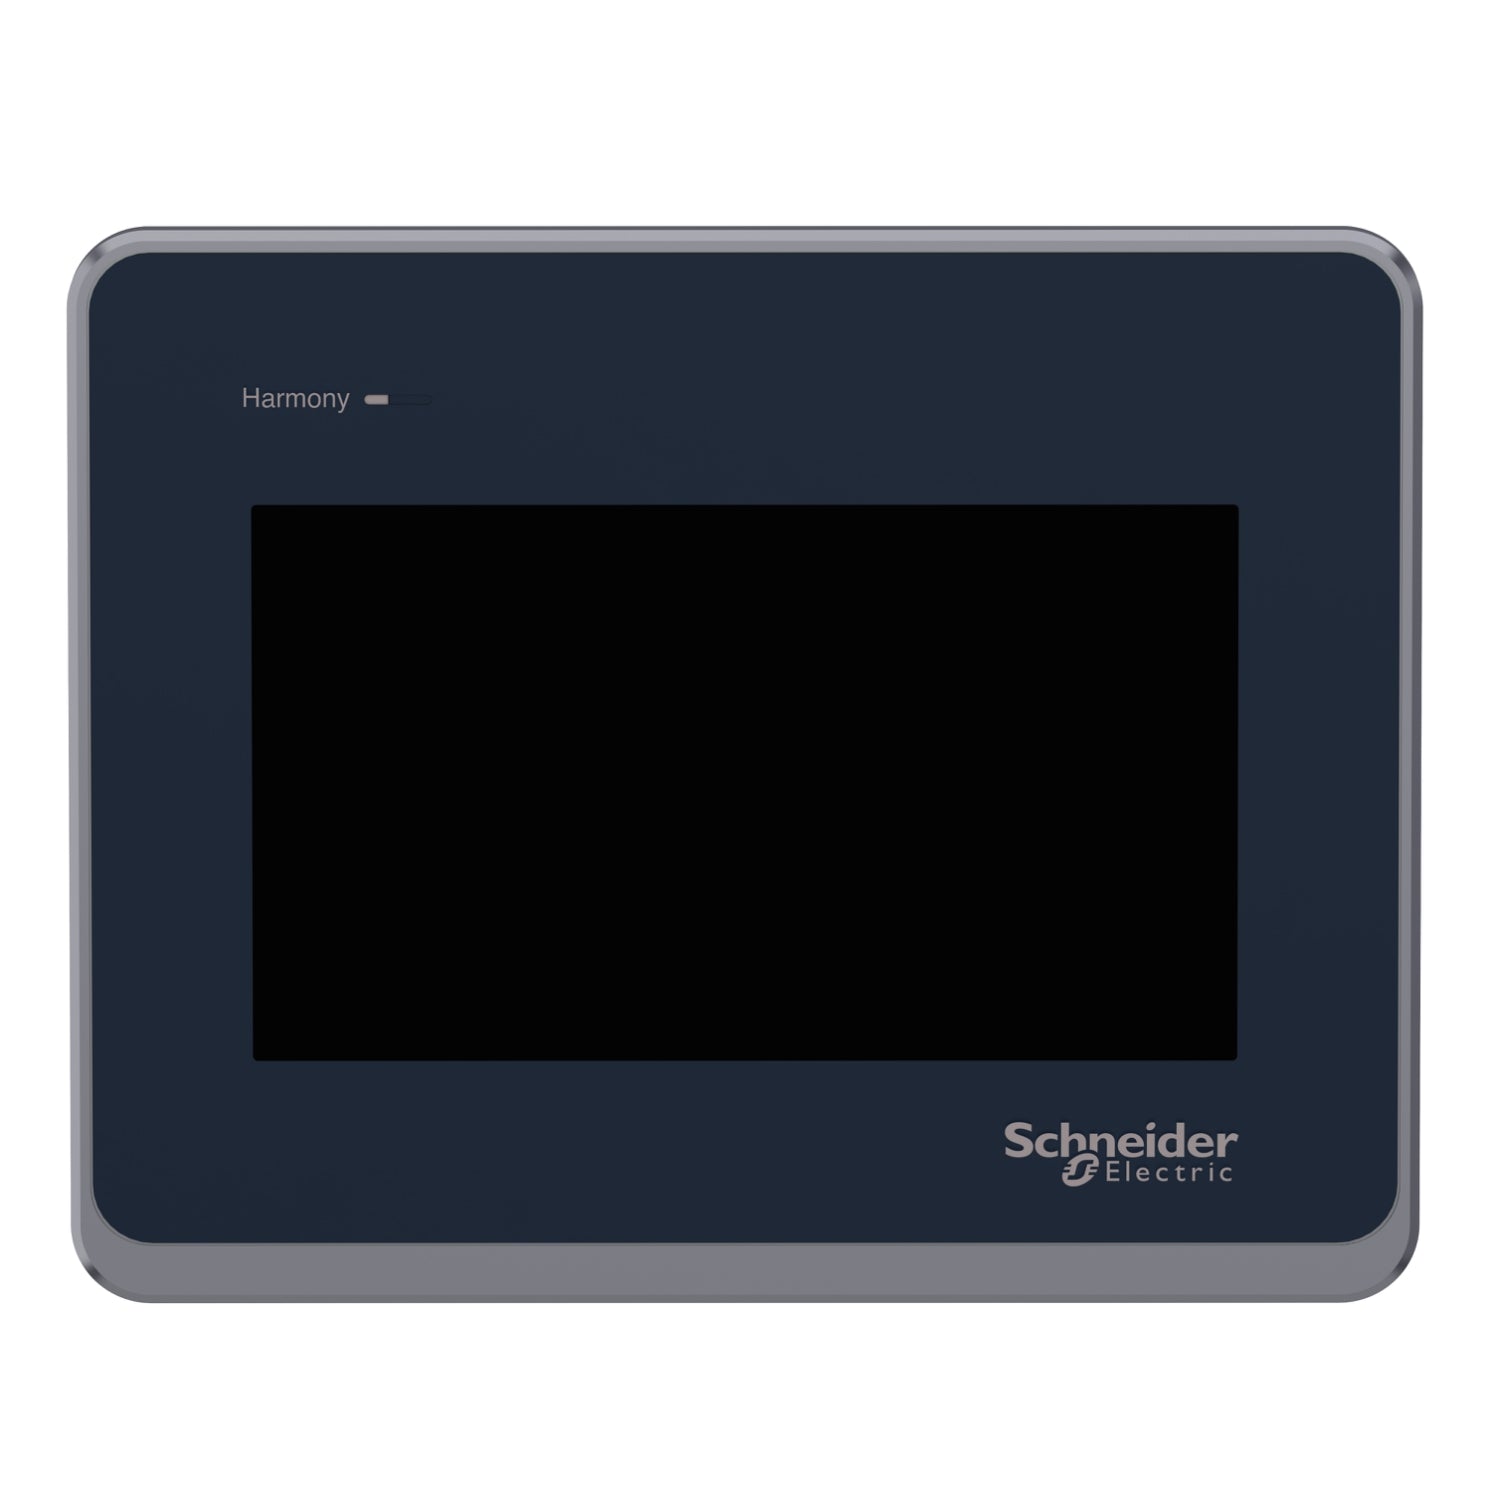 HMIST6200 | Schneider Electric | Touch panel screen, Harmony ST6, 4inch wide display, 1COM, 1Ethernet, USB host and device, 24V DC